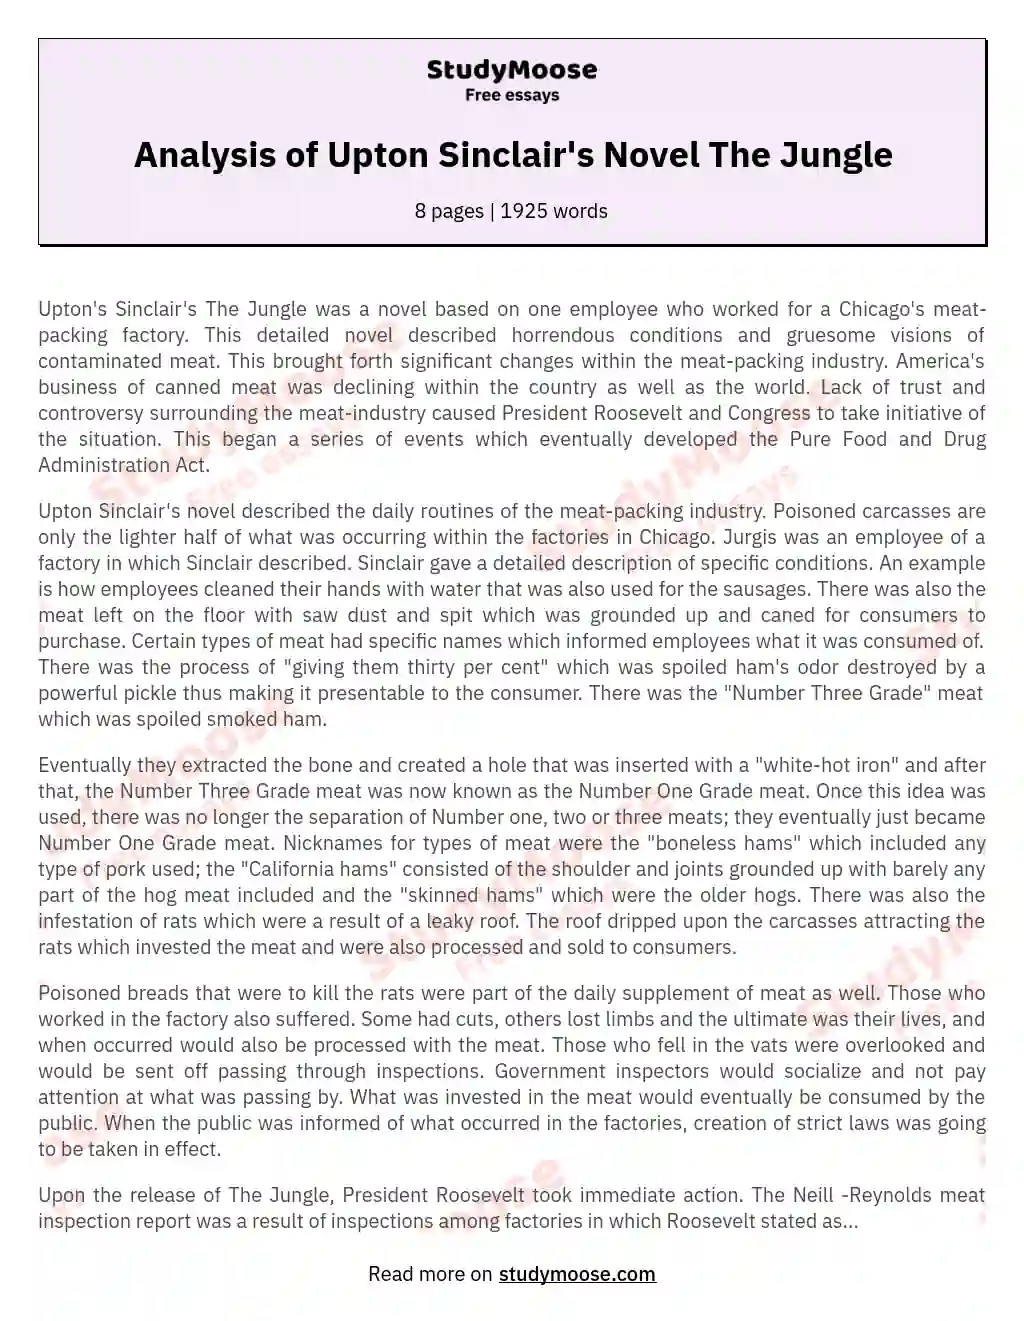 Analysis of Upton Sinclair's Novel The Jungle